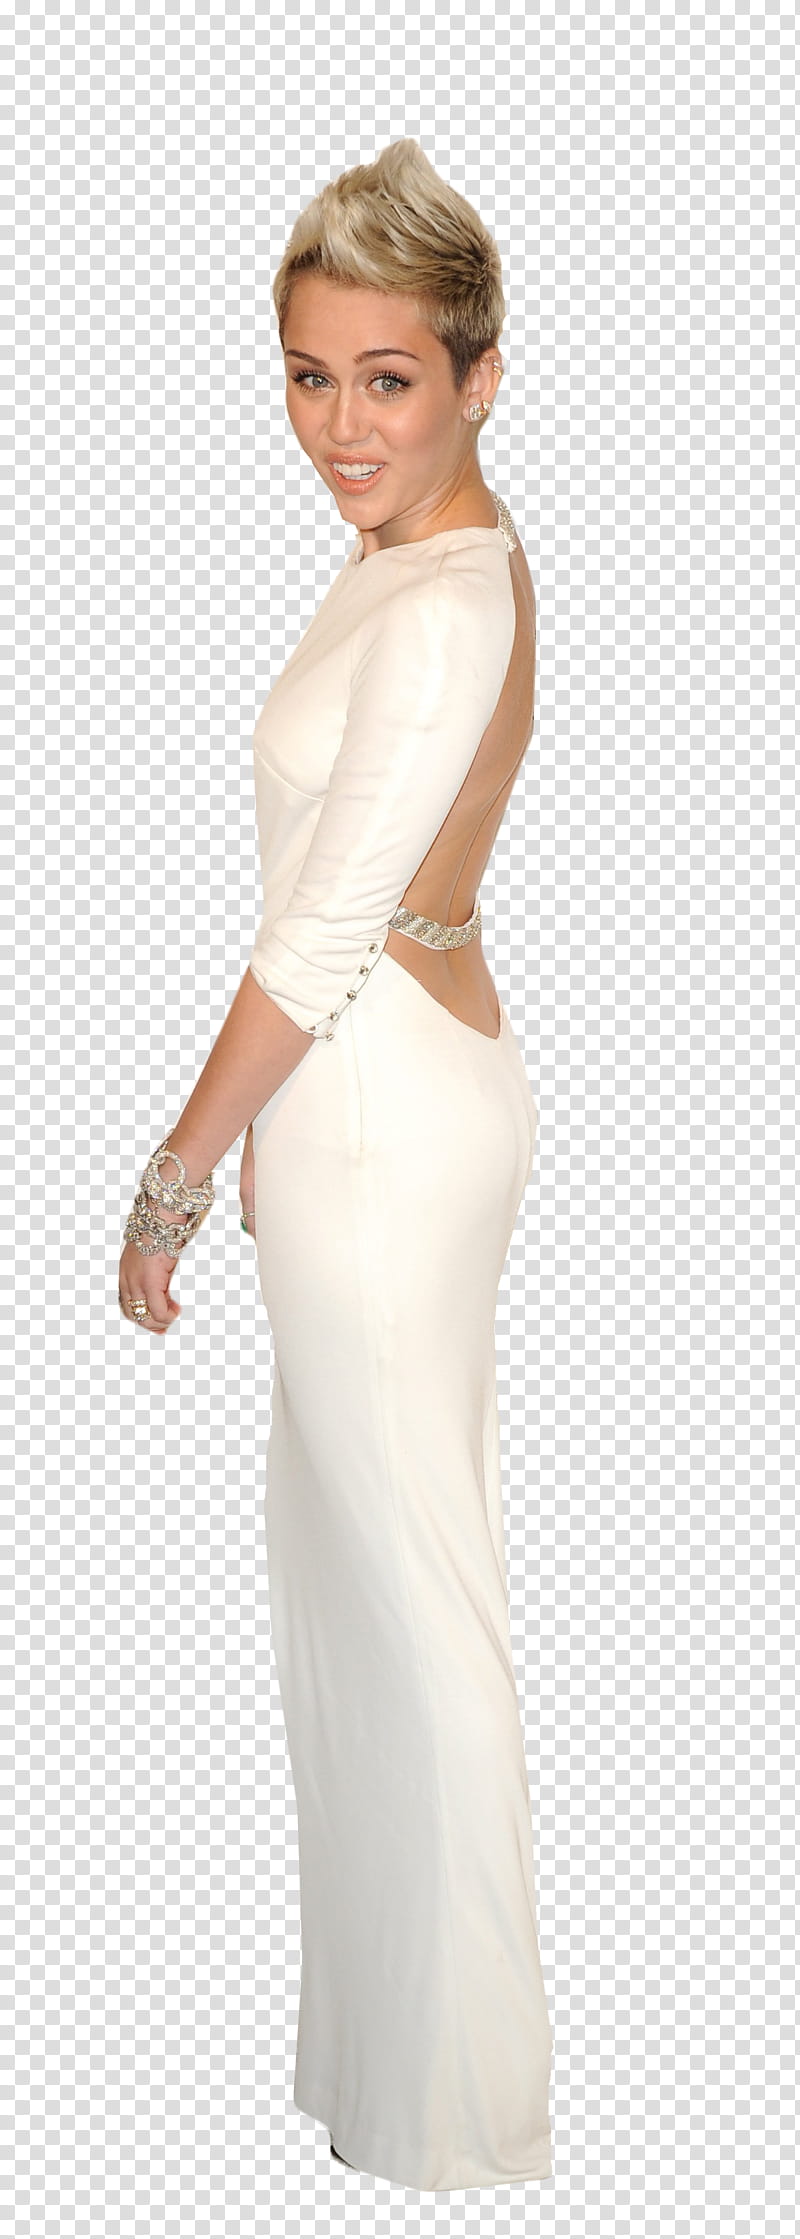 Miley Cyrus, smiling Miley Cyrus wearing white long-sleeved backless dress transparent background PNG clipart